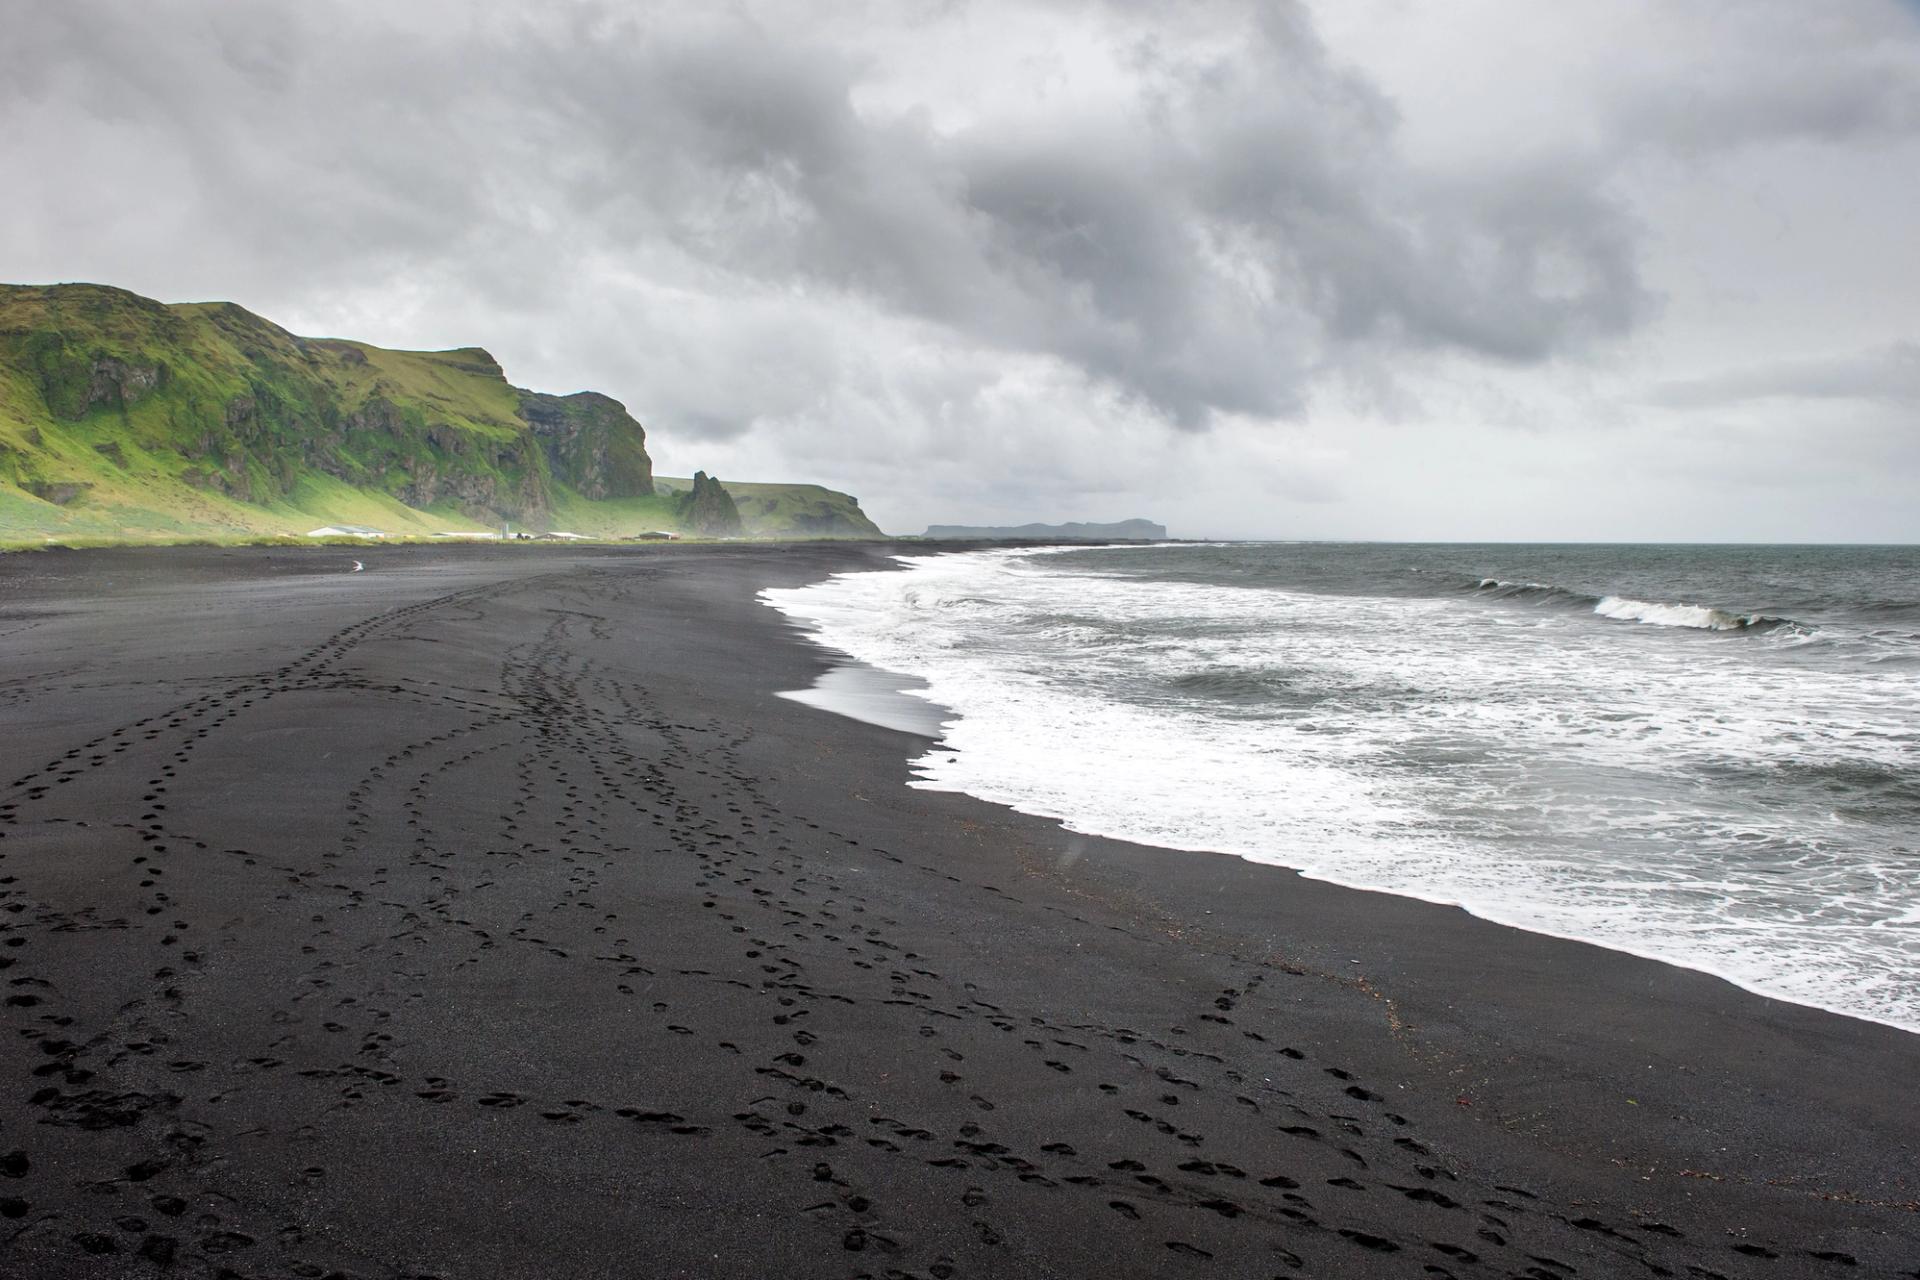 Marvel at the surreal beauty of Iceland's black sand beaches during your self-drive tour.